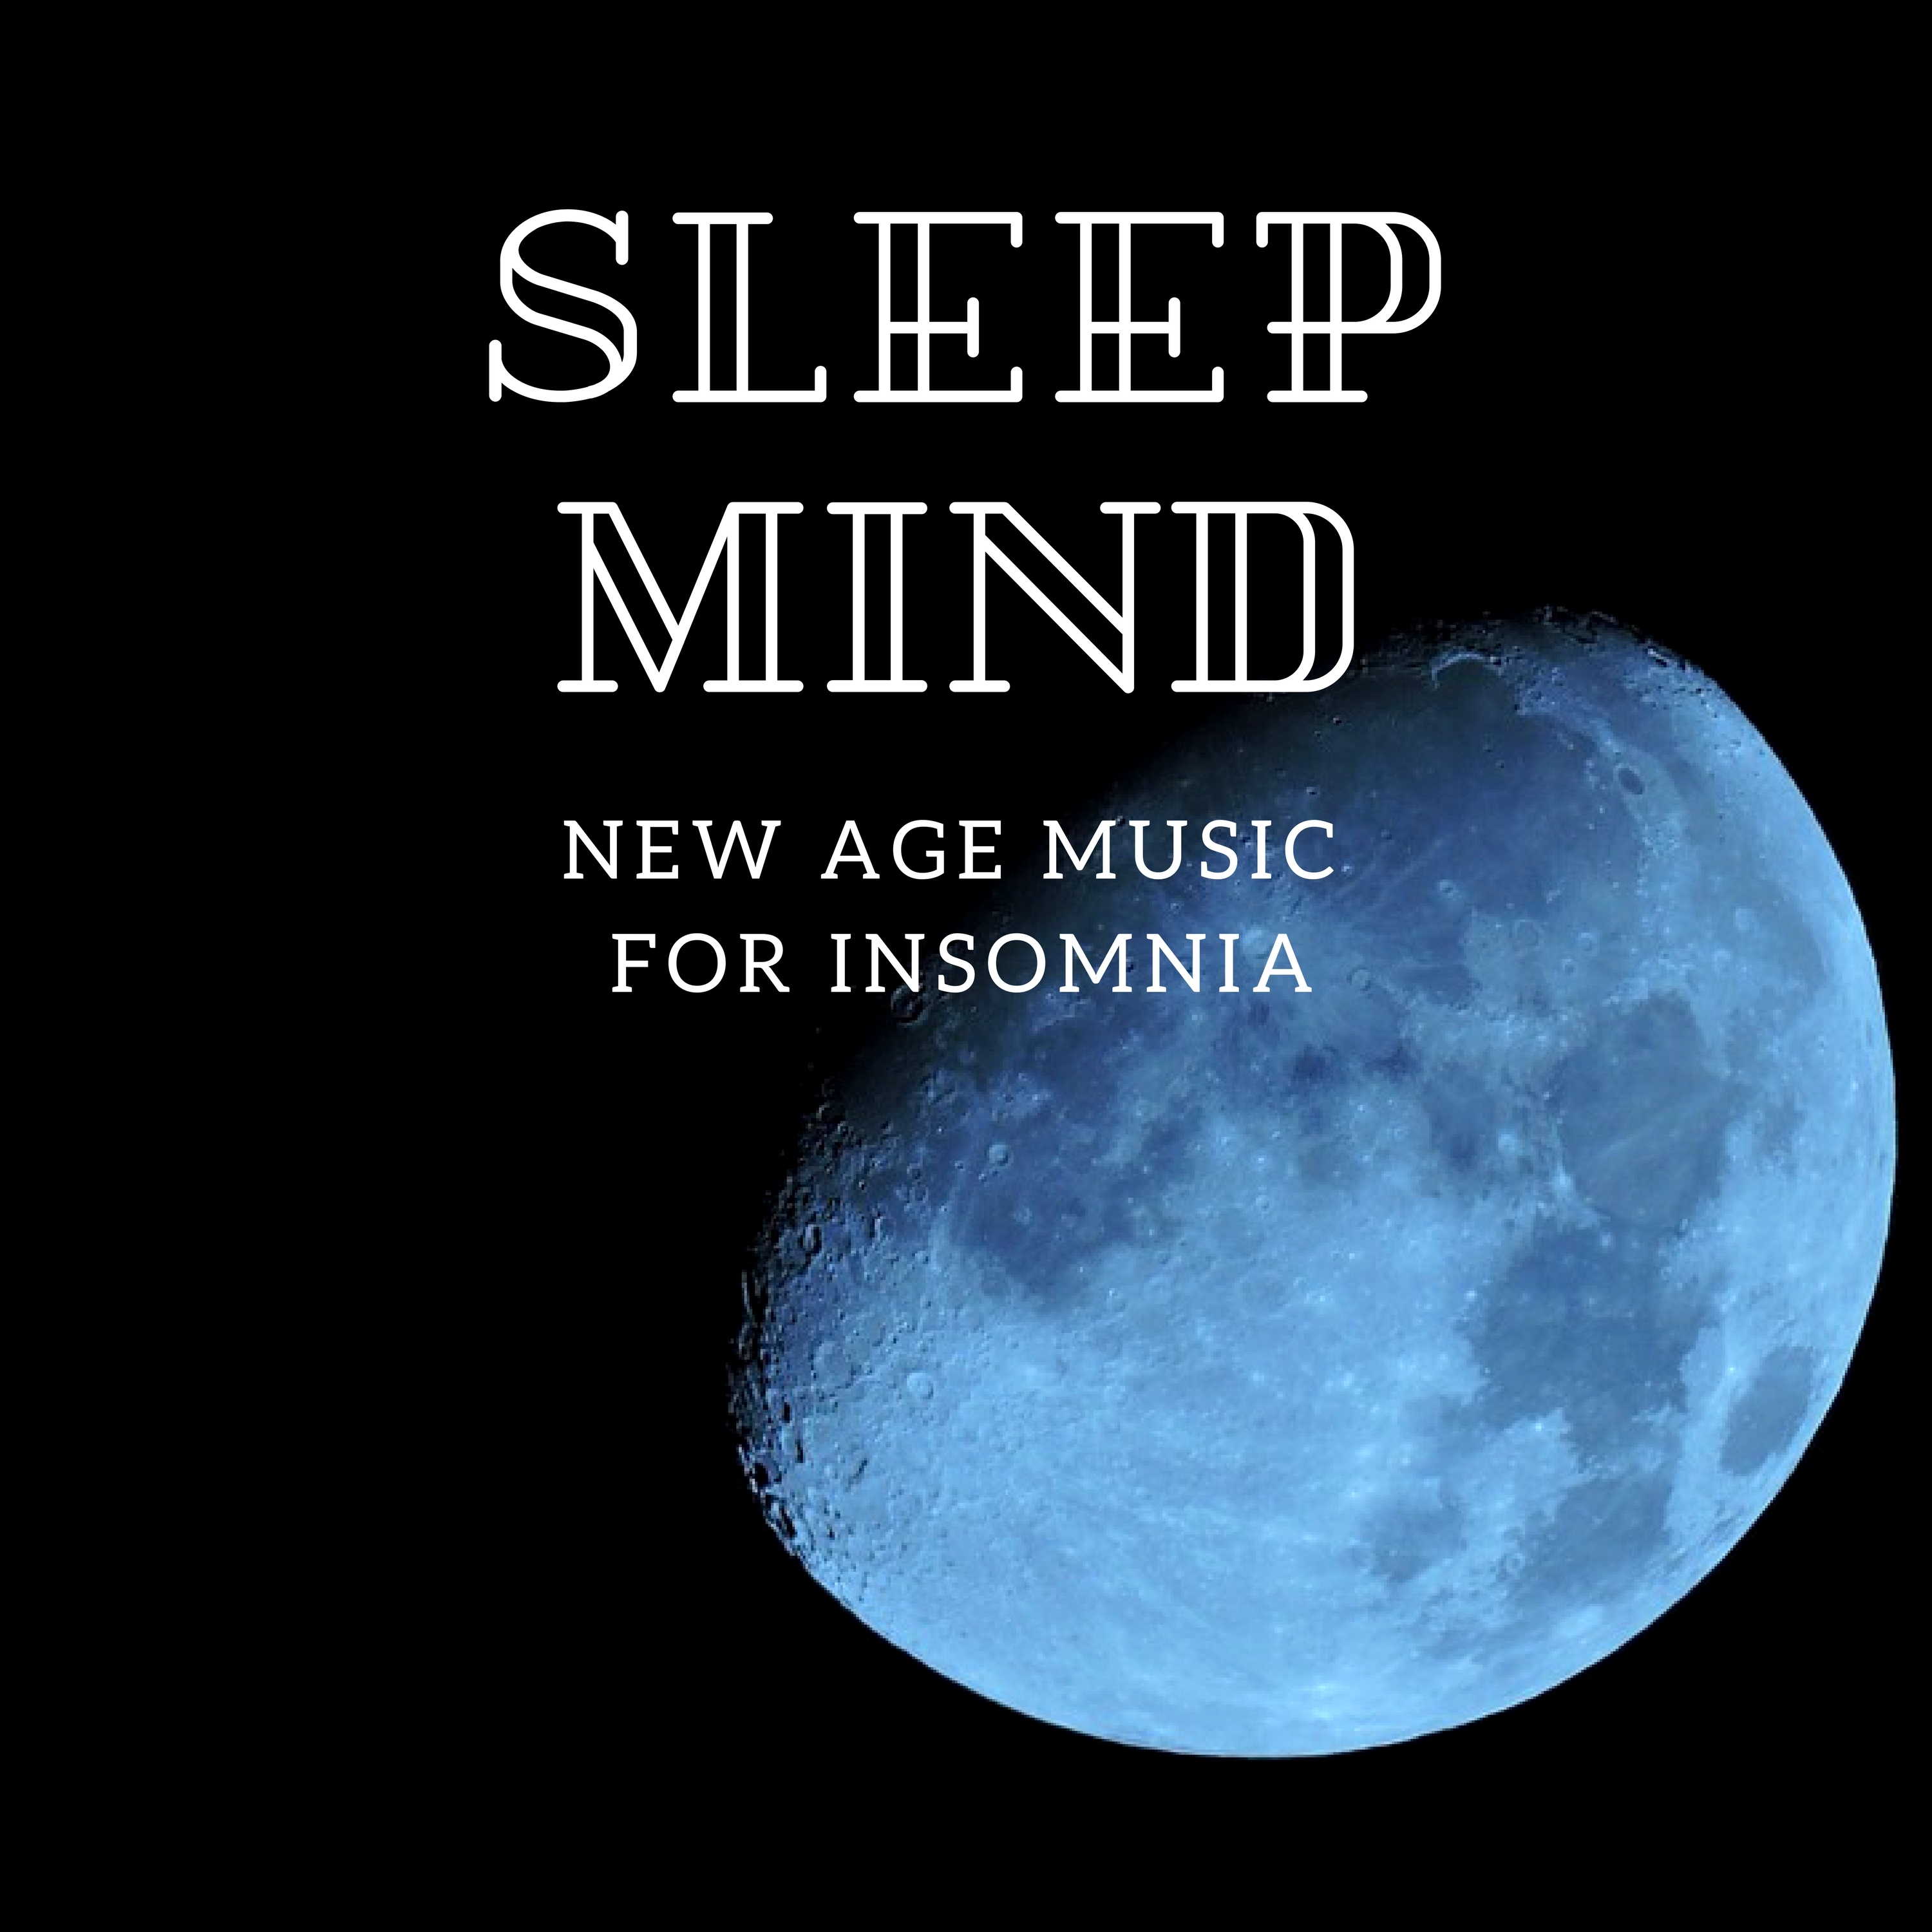 Music for Insomnia